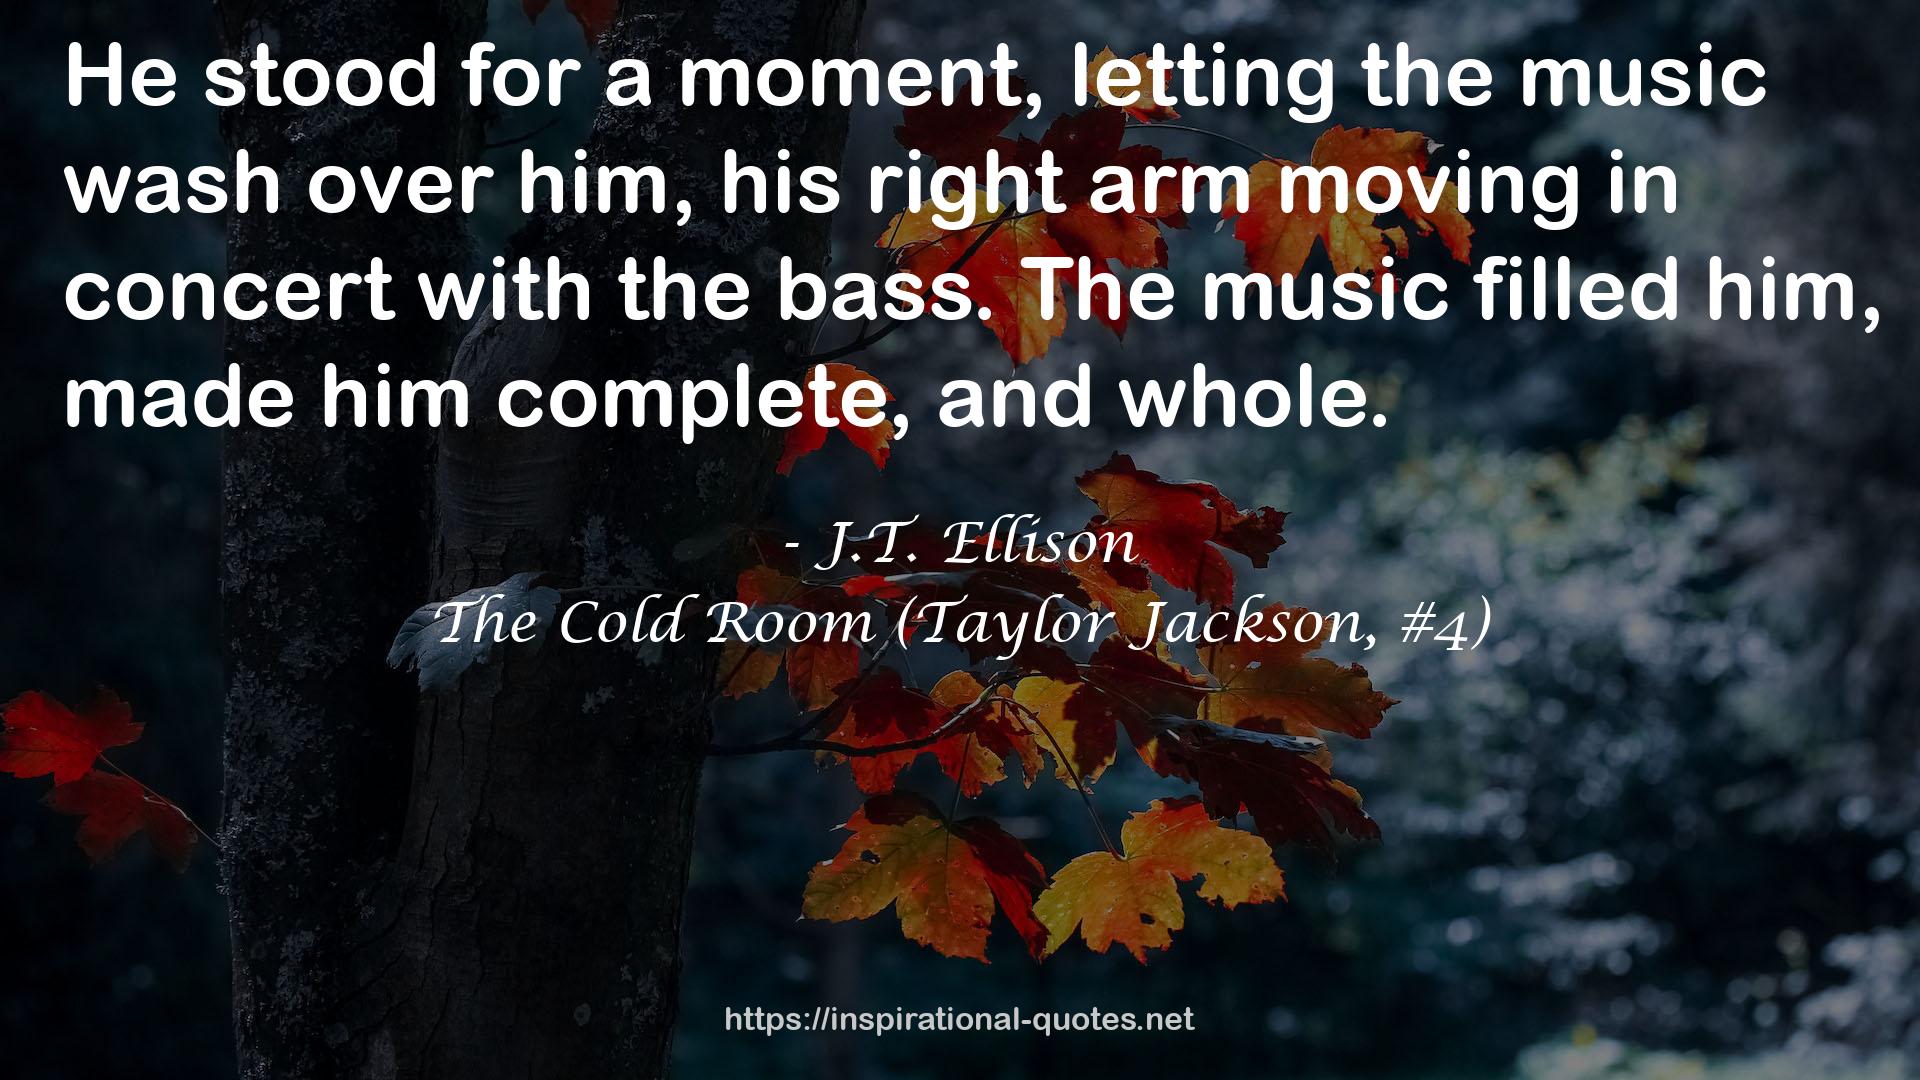 The Cold Room (Taylor Jackson, #4) QUOTES